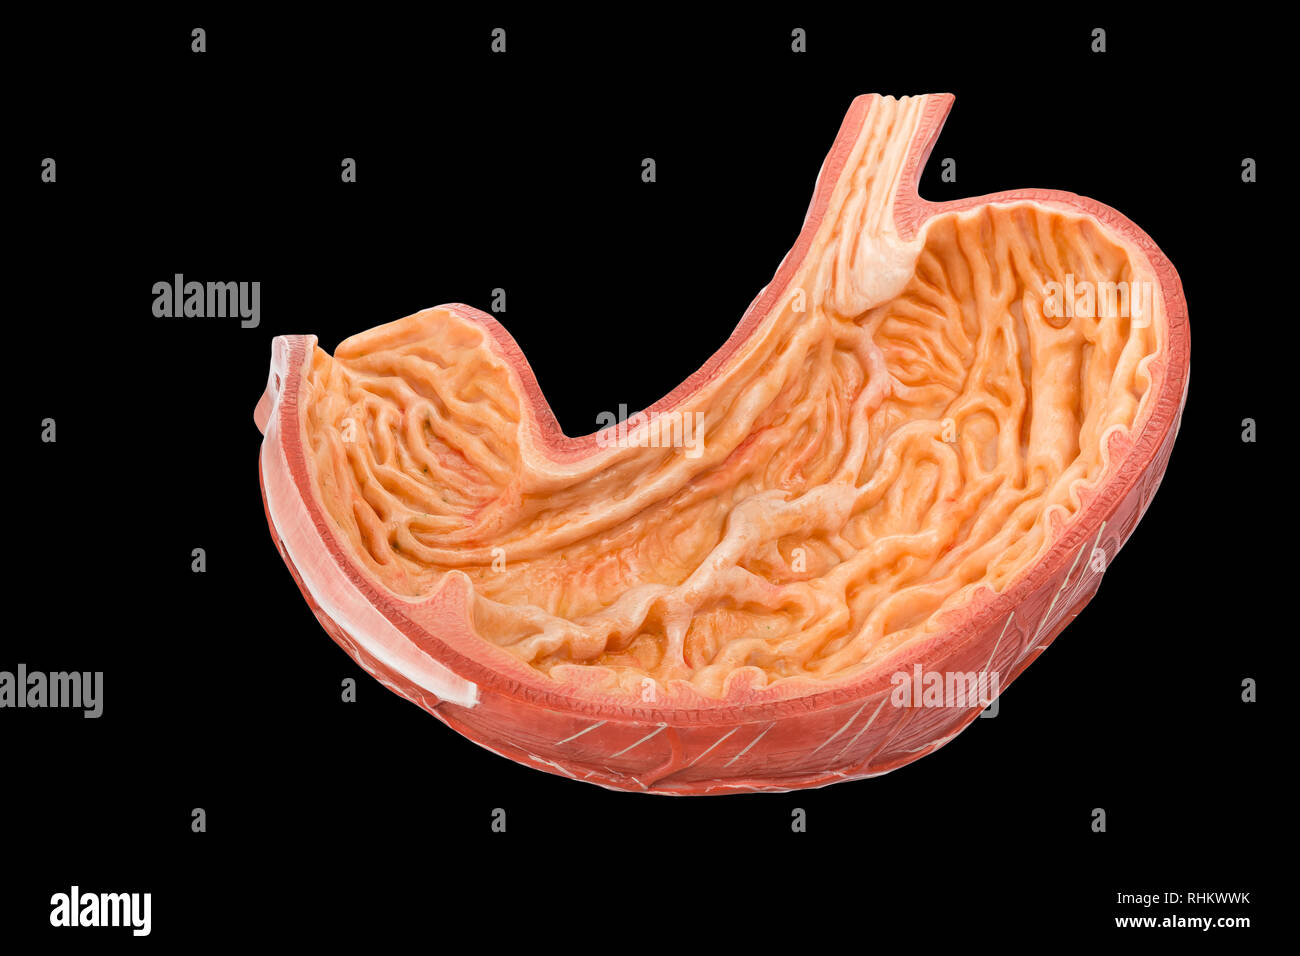 Model inside of human stomach isolated on black background Stock Photo